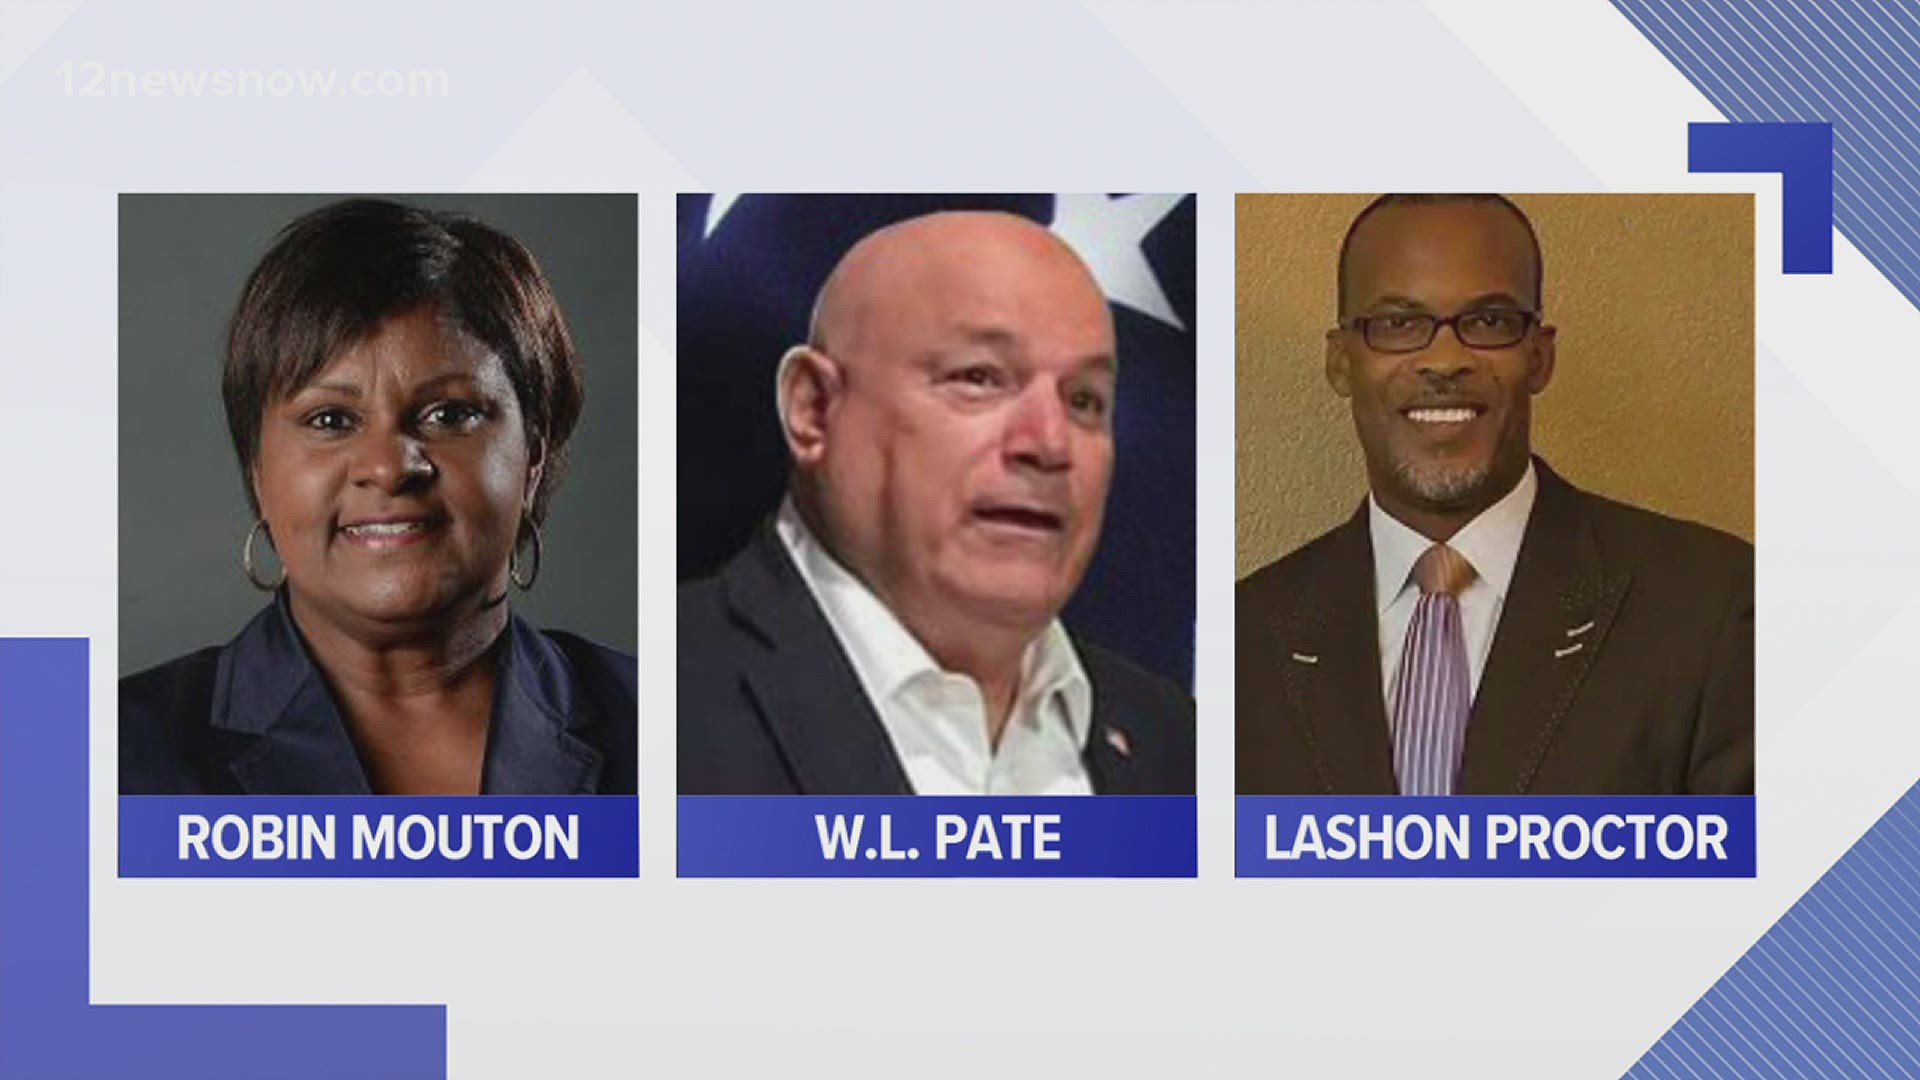 Five candidates for Beaumont mayor will be running in the May election: Robin Mouton, W.L. Pate, Lashon Proctor, Biguita Hernandez Smith and Roy West, Jr.